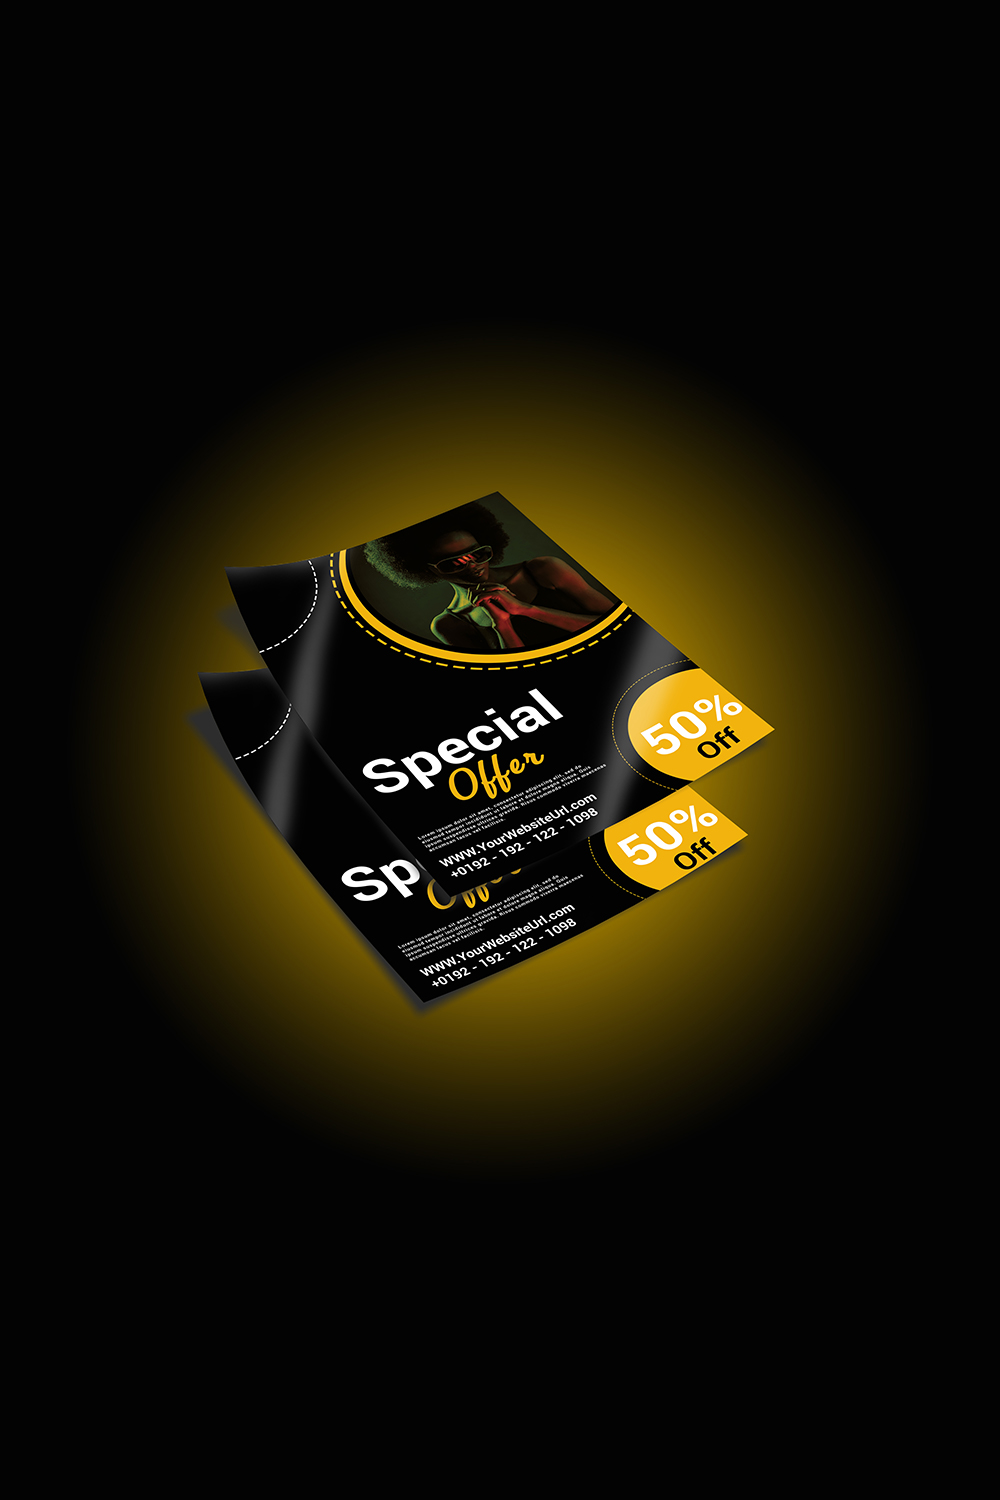 Special offer poster design pinterest preview image.